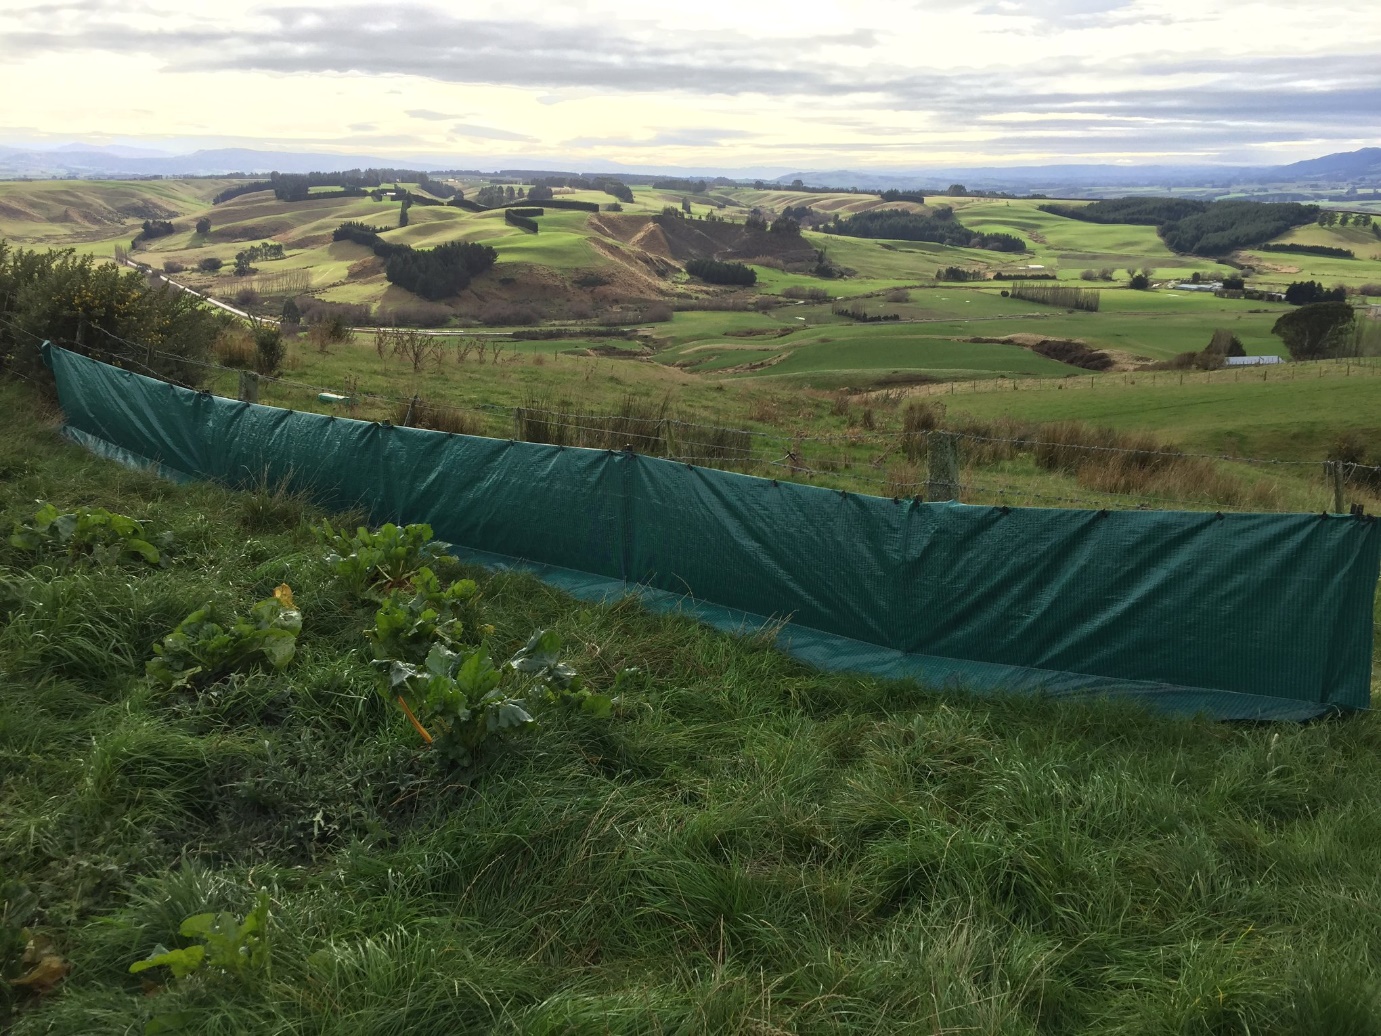 Long 'before' shot of a green plastic-lined fence on the side of a hill.